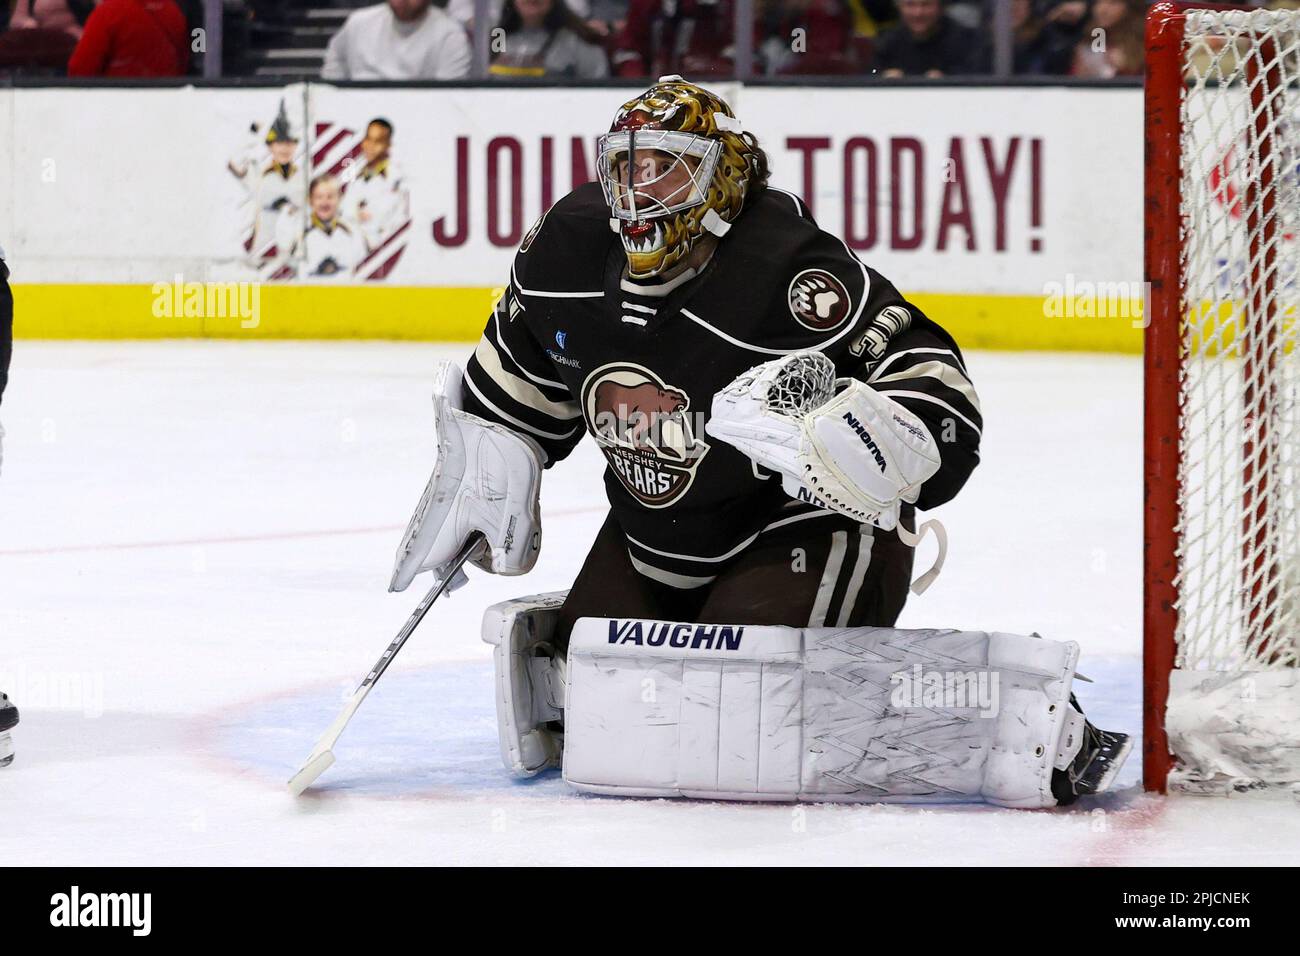 CLEVELAND, OH - APRIL 30: Cleveland Monsters goalie Jet Greaves (31) in  goal during the third period